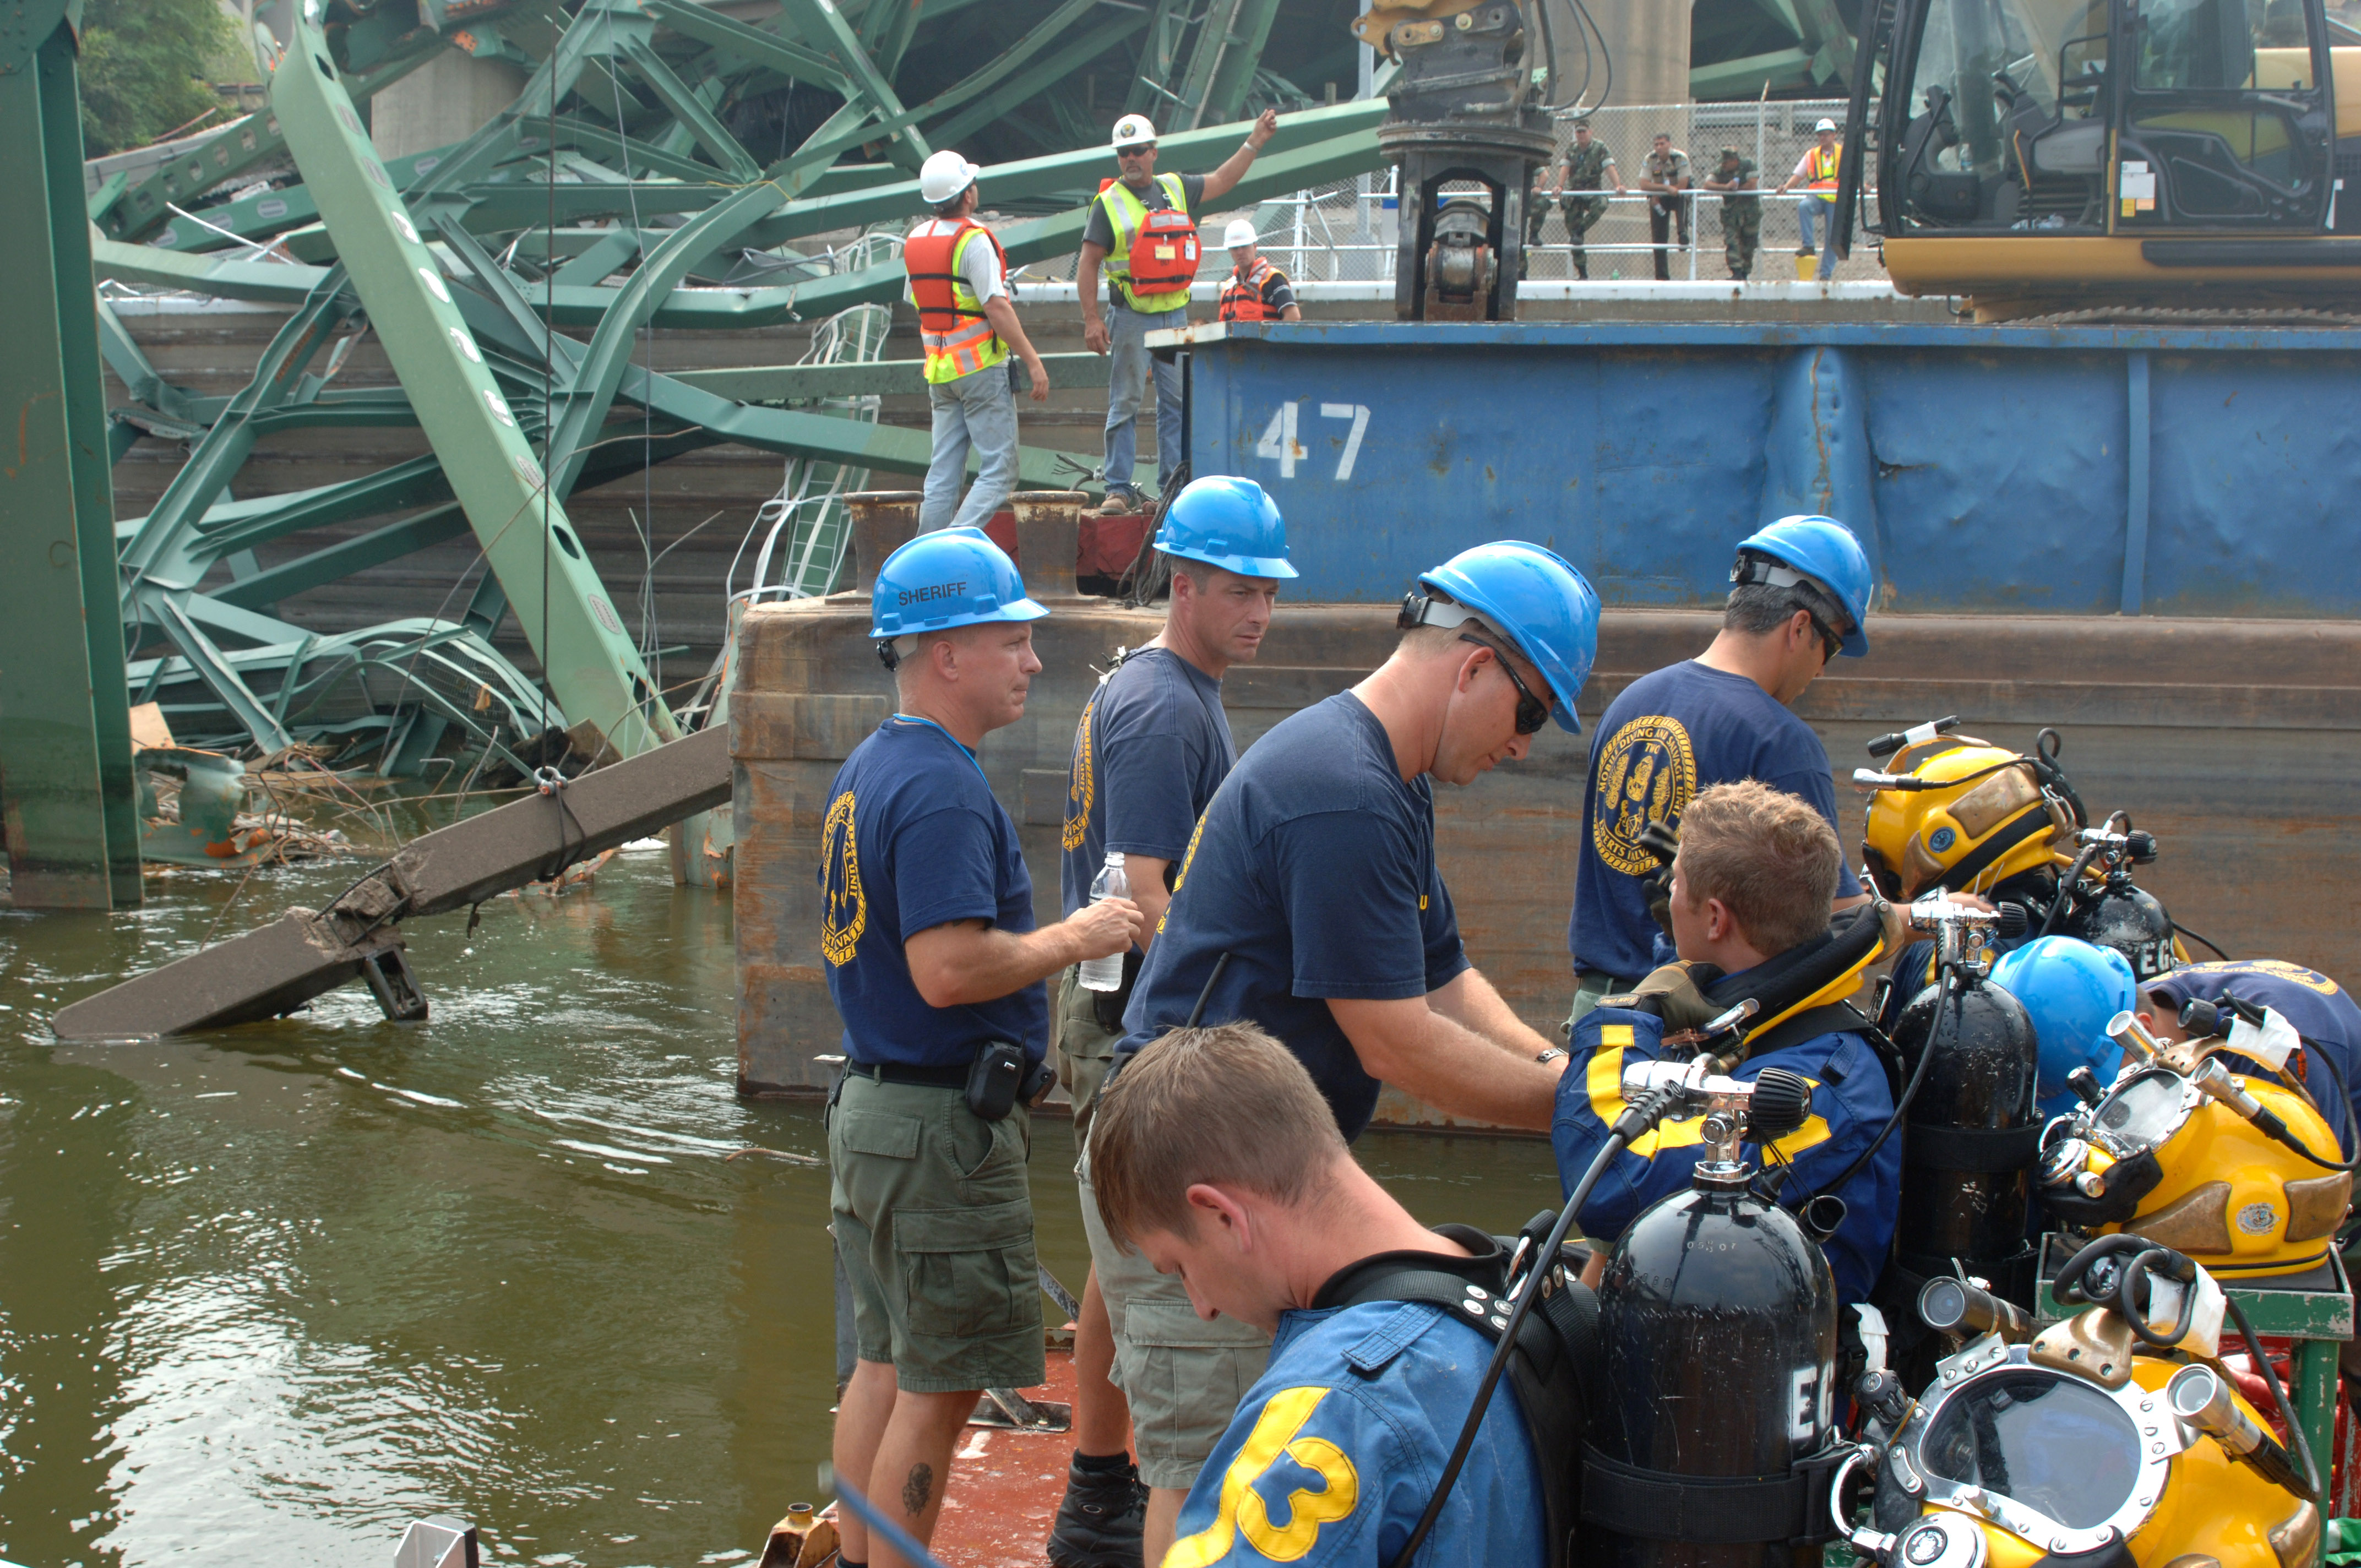 US_Navy_070815-N-7405P-005_Navy_divers_from_Mobile_Diving_and_Salvage_Unit_(MDSU)_2_prepare_to_conduct_a_dive_into_the_Mississippi_River_to_tie_up_concrete_that_fell_in_during_the_I-35_Bridge_collapse.jpg